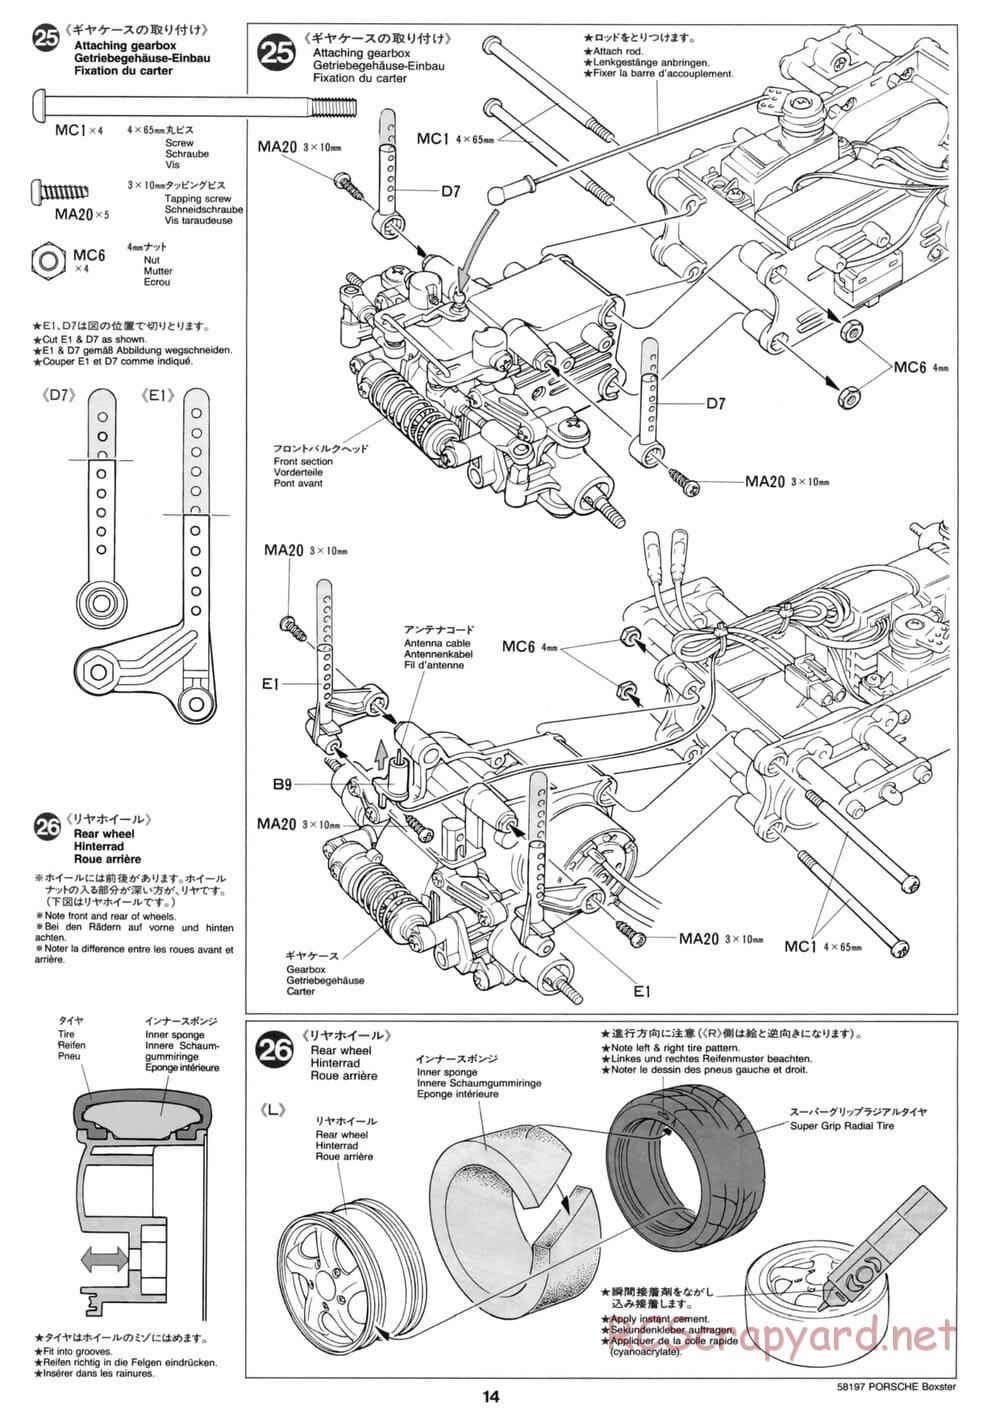 Tamiya - Porsche Boxster - M02L Chassis - Manual - Page 14